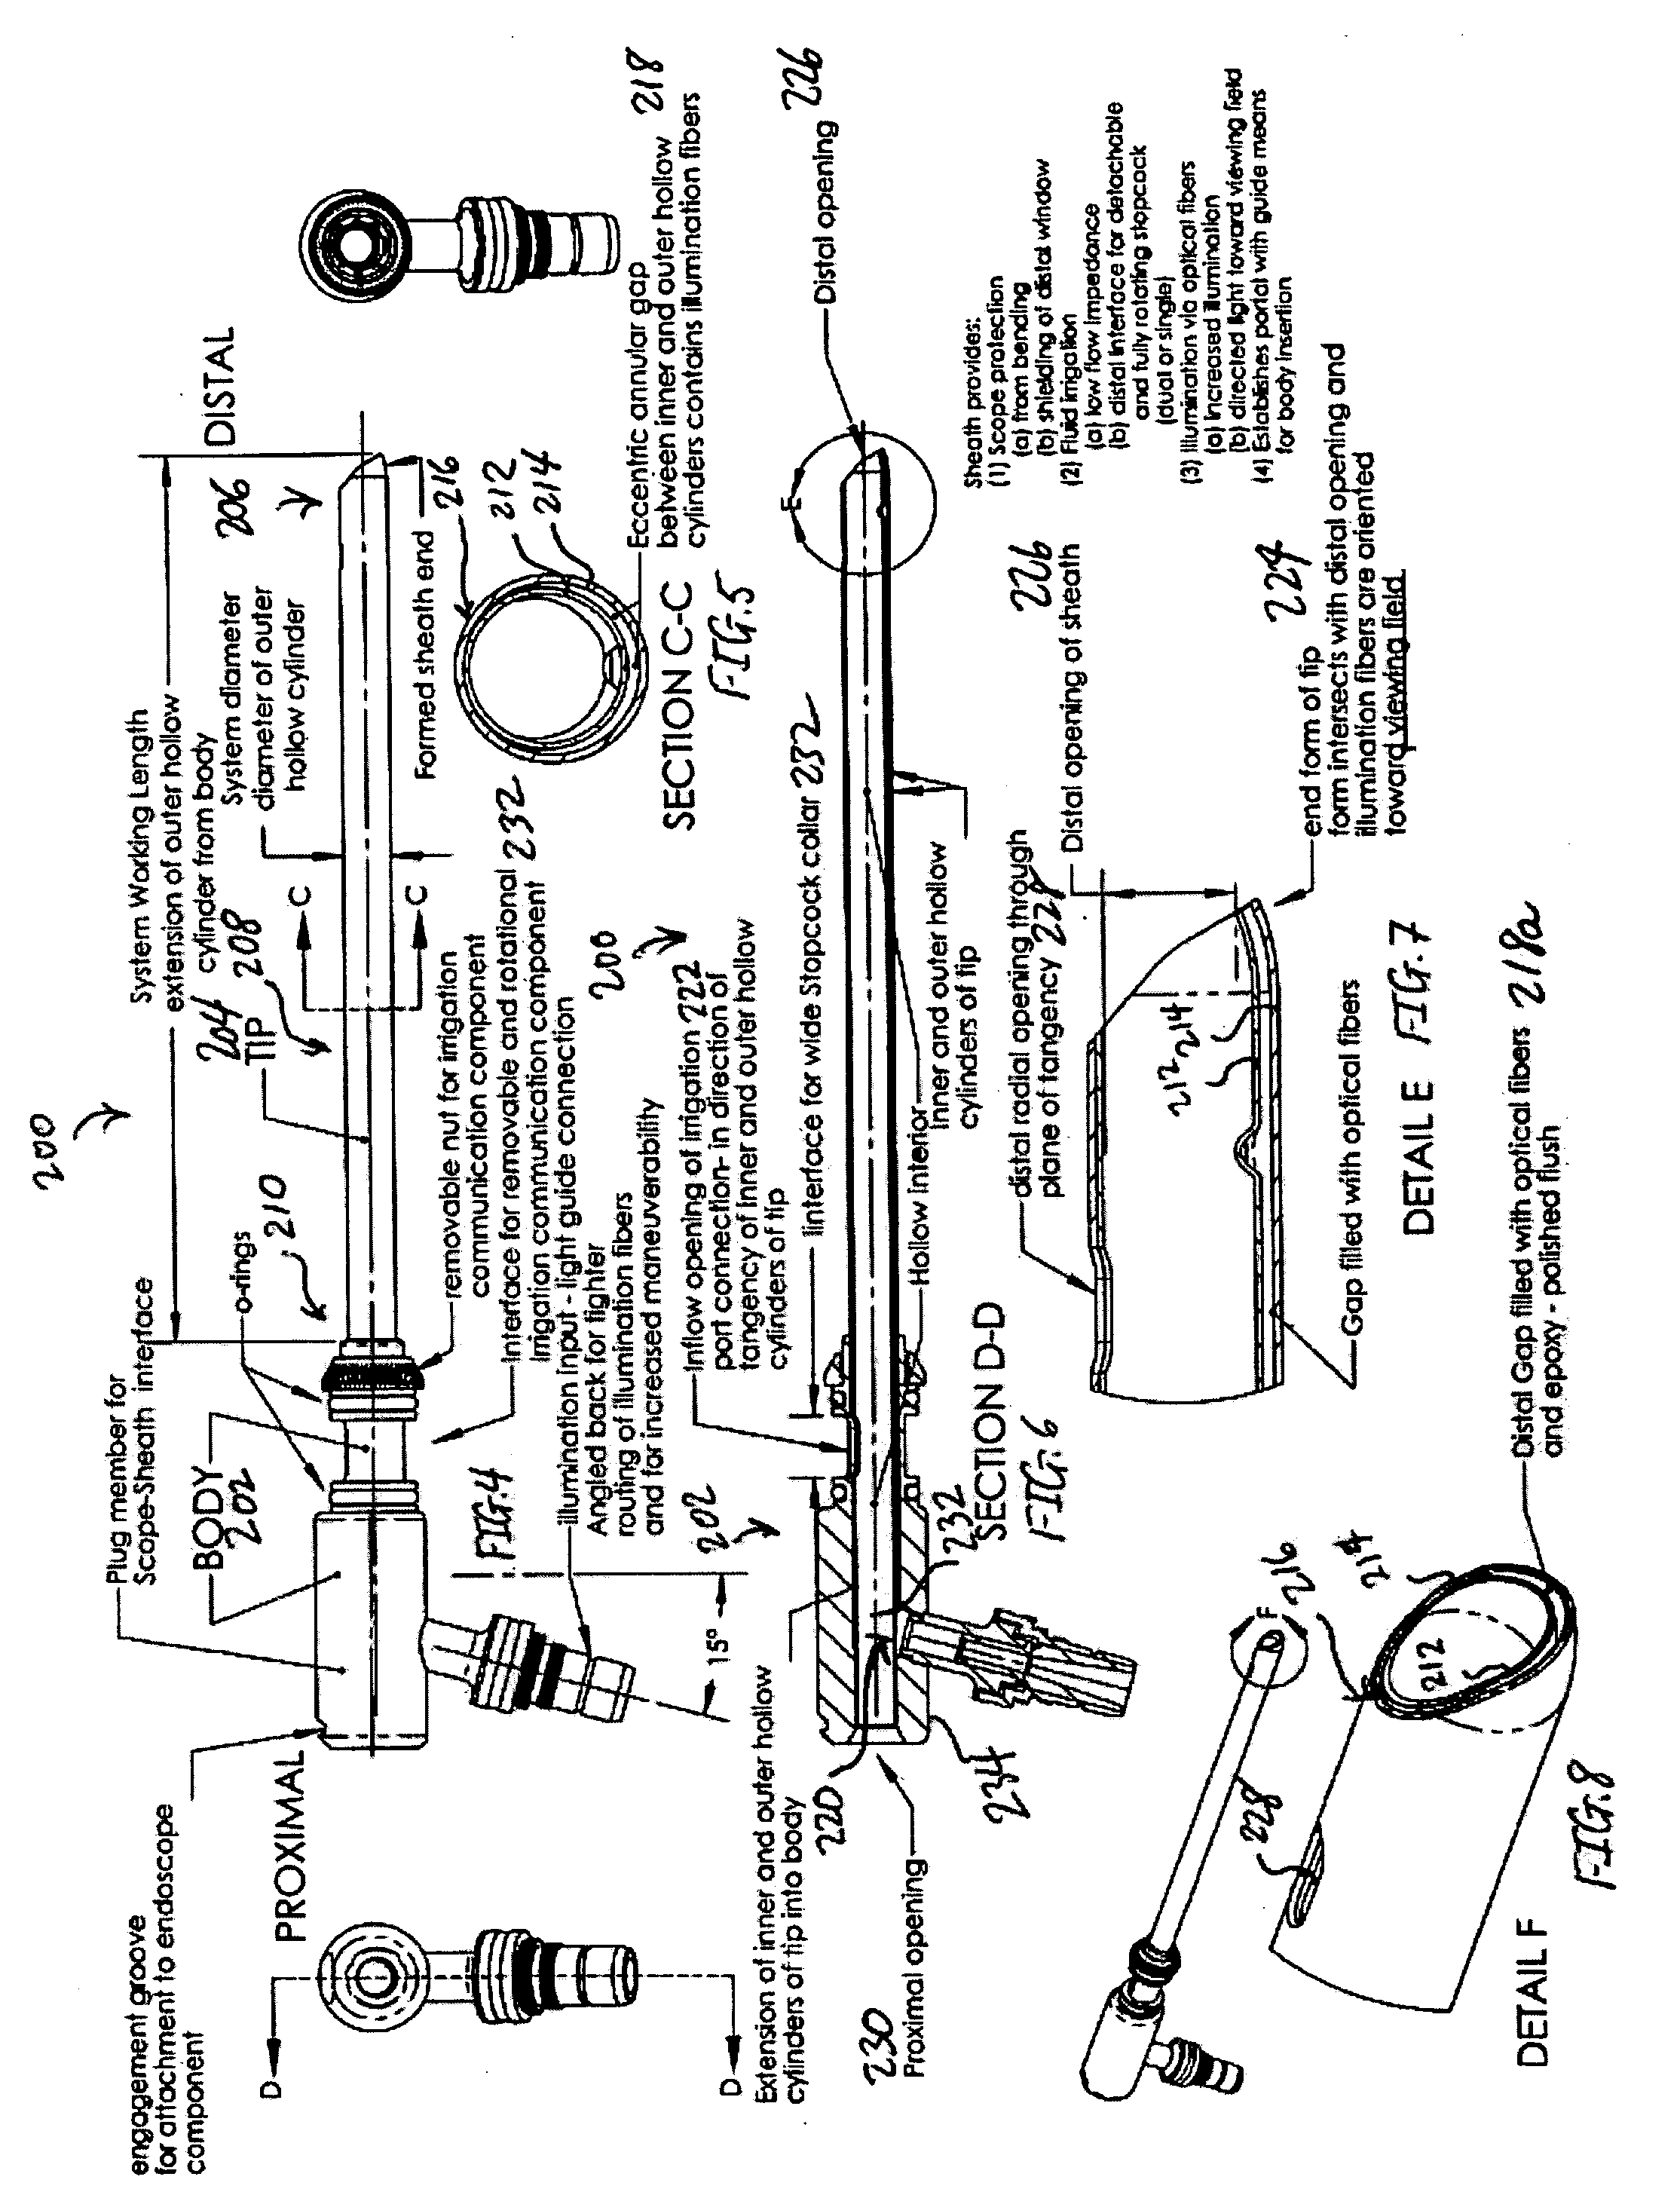 Endoscope and related system